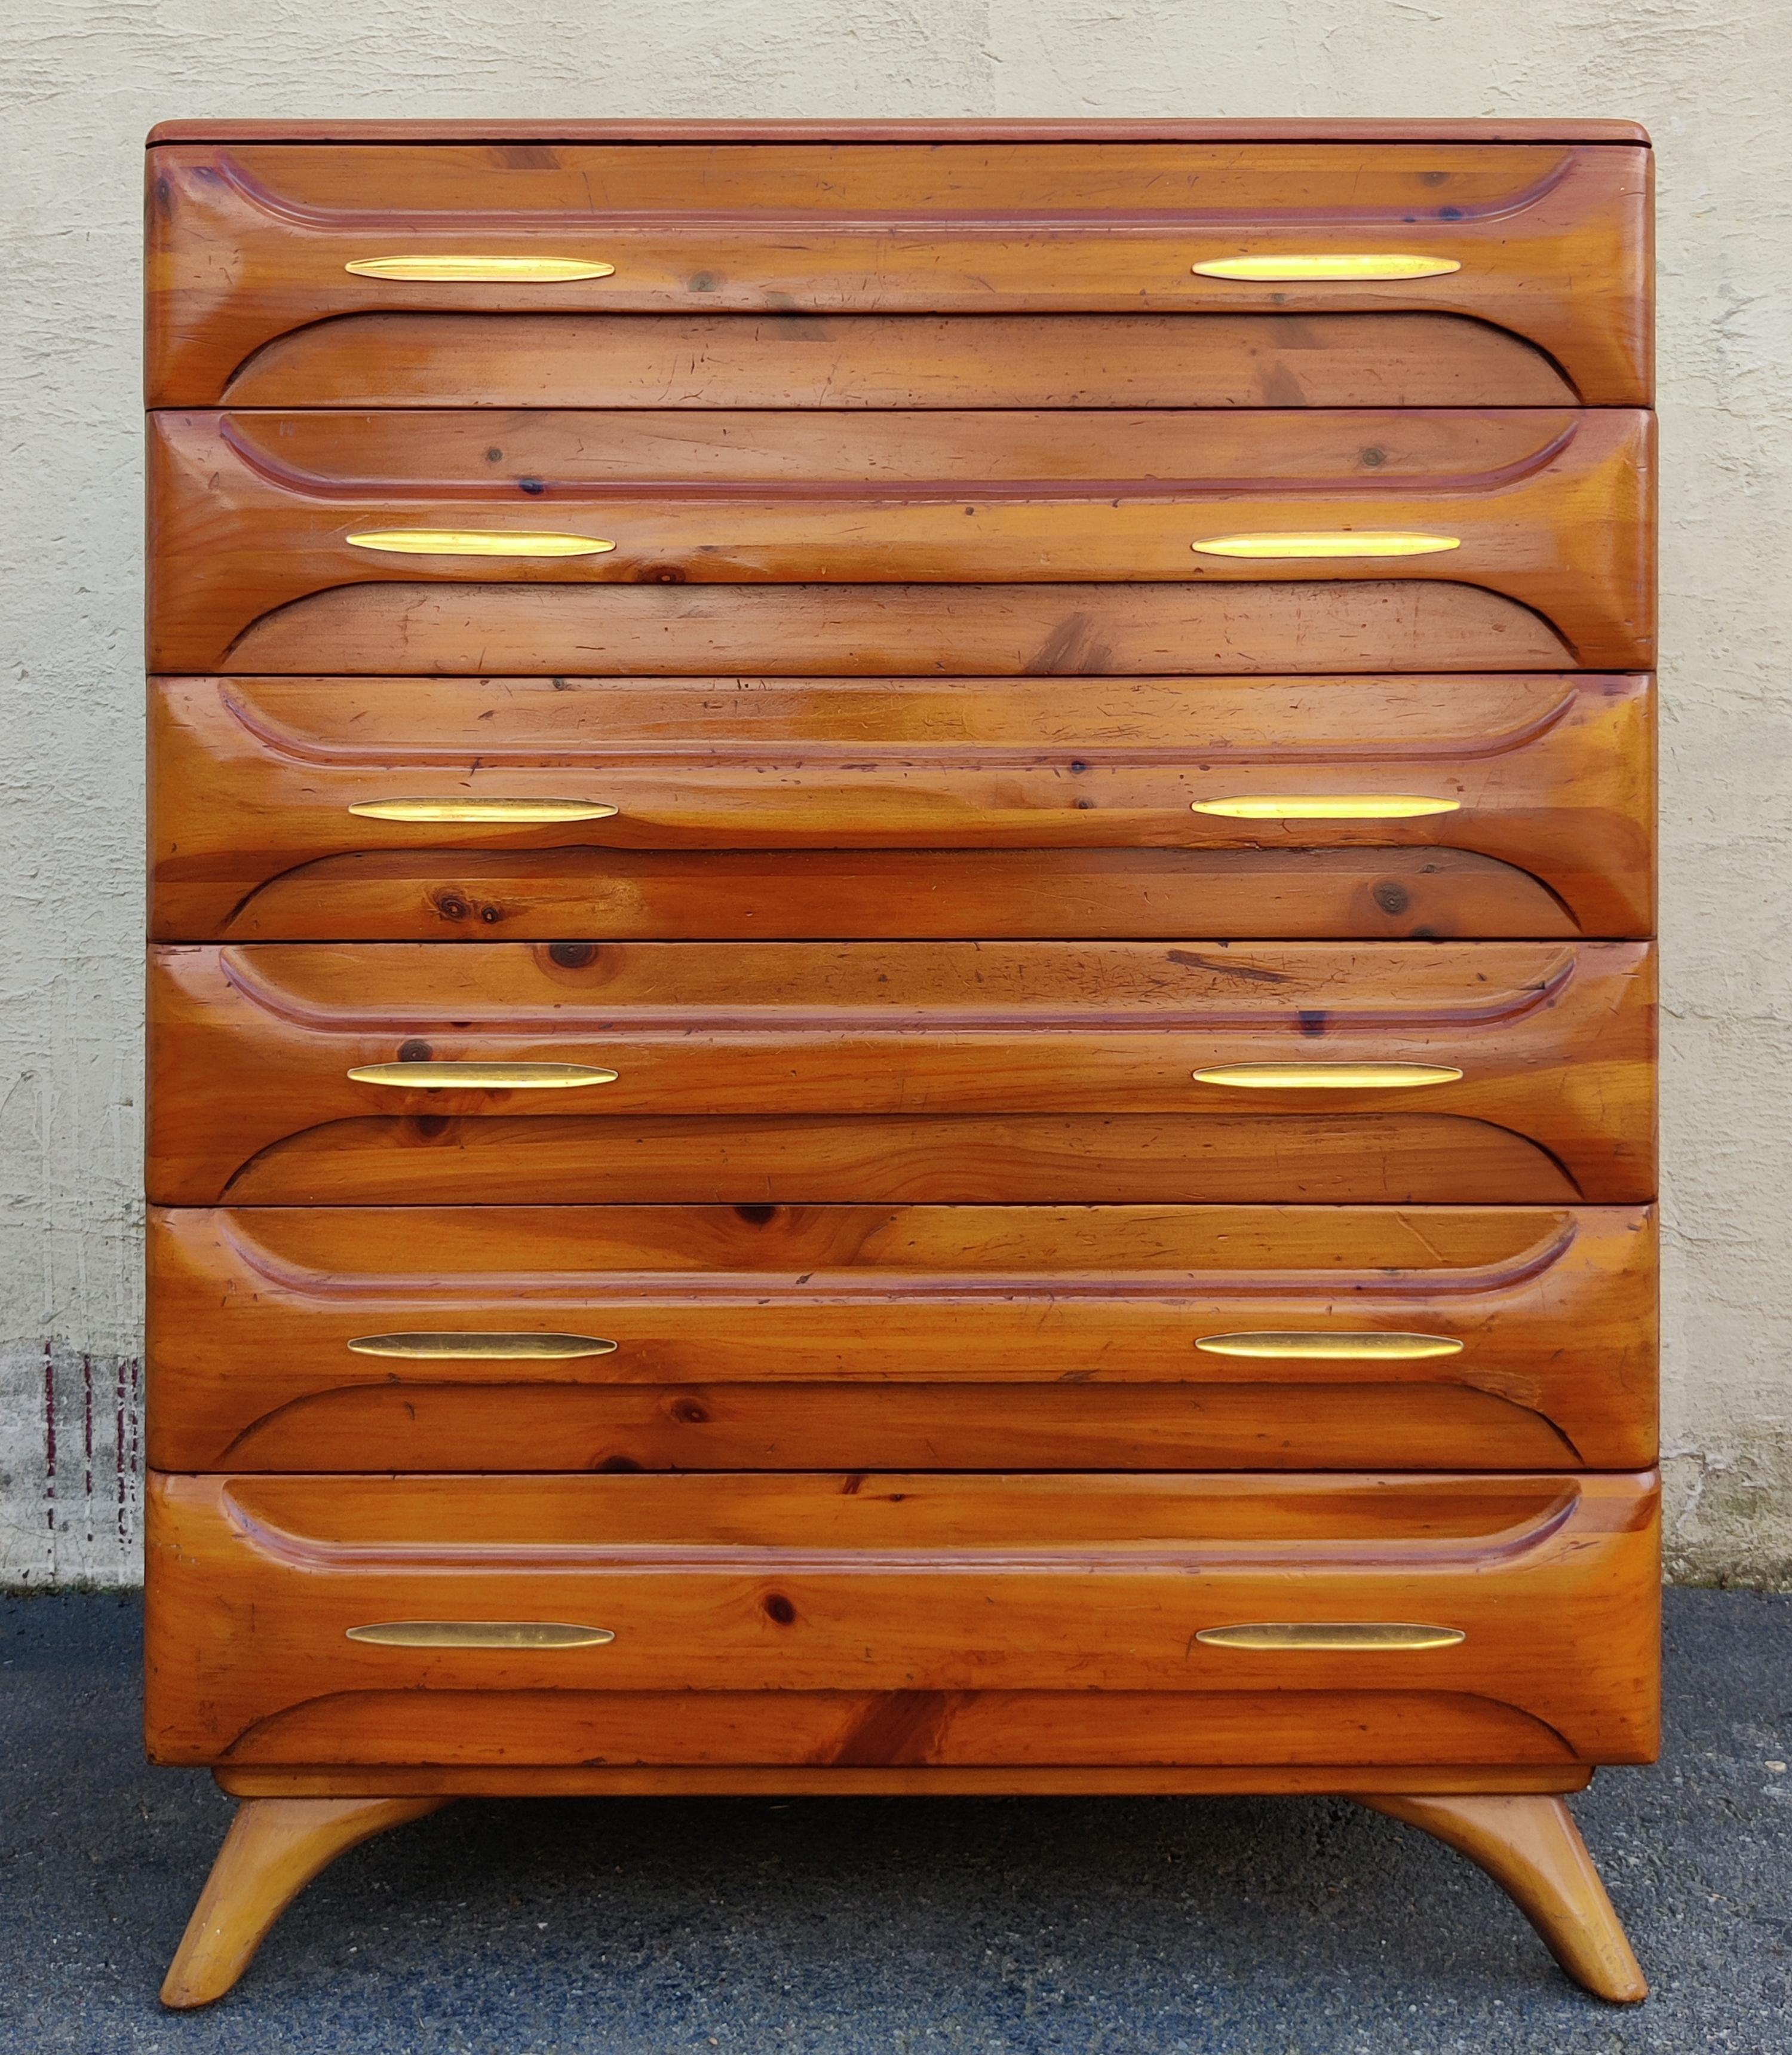 This tall dresser was designed and made in the 1970s by the Franklin Shockey Company for their Sculptured Pine line of furniture. Featuring solid pine construction, this dresser has a light and warm golden pine color with satin varnished finish.